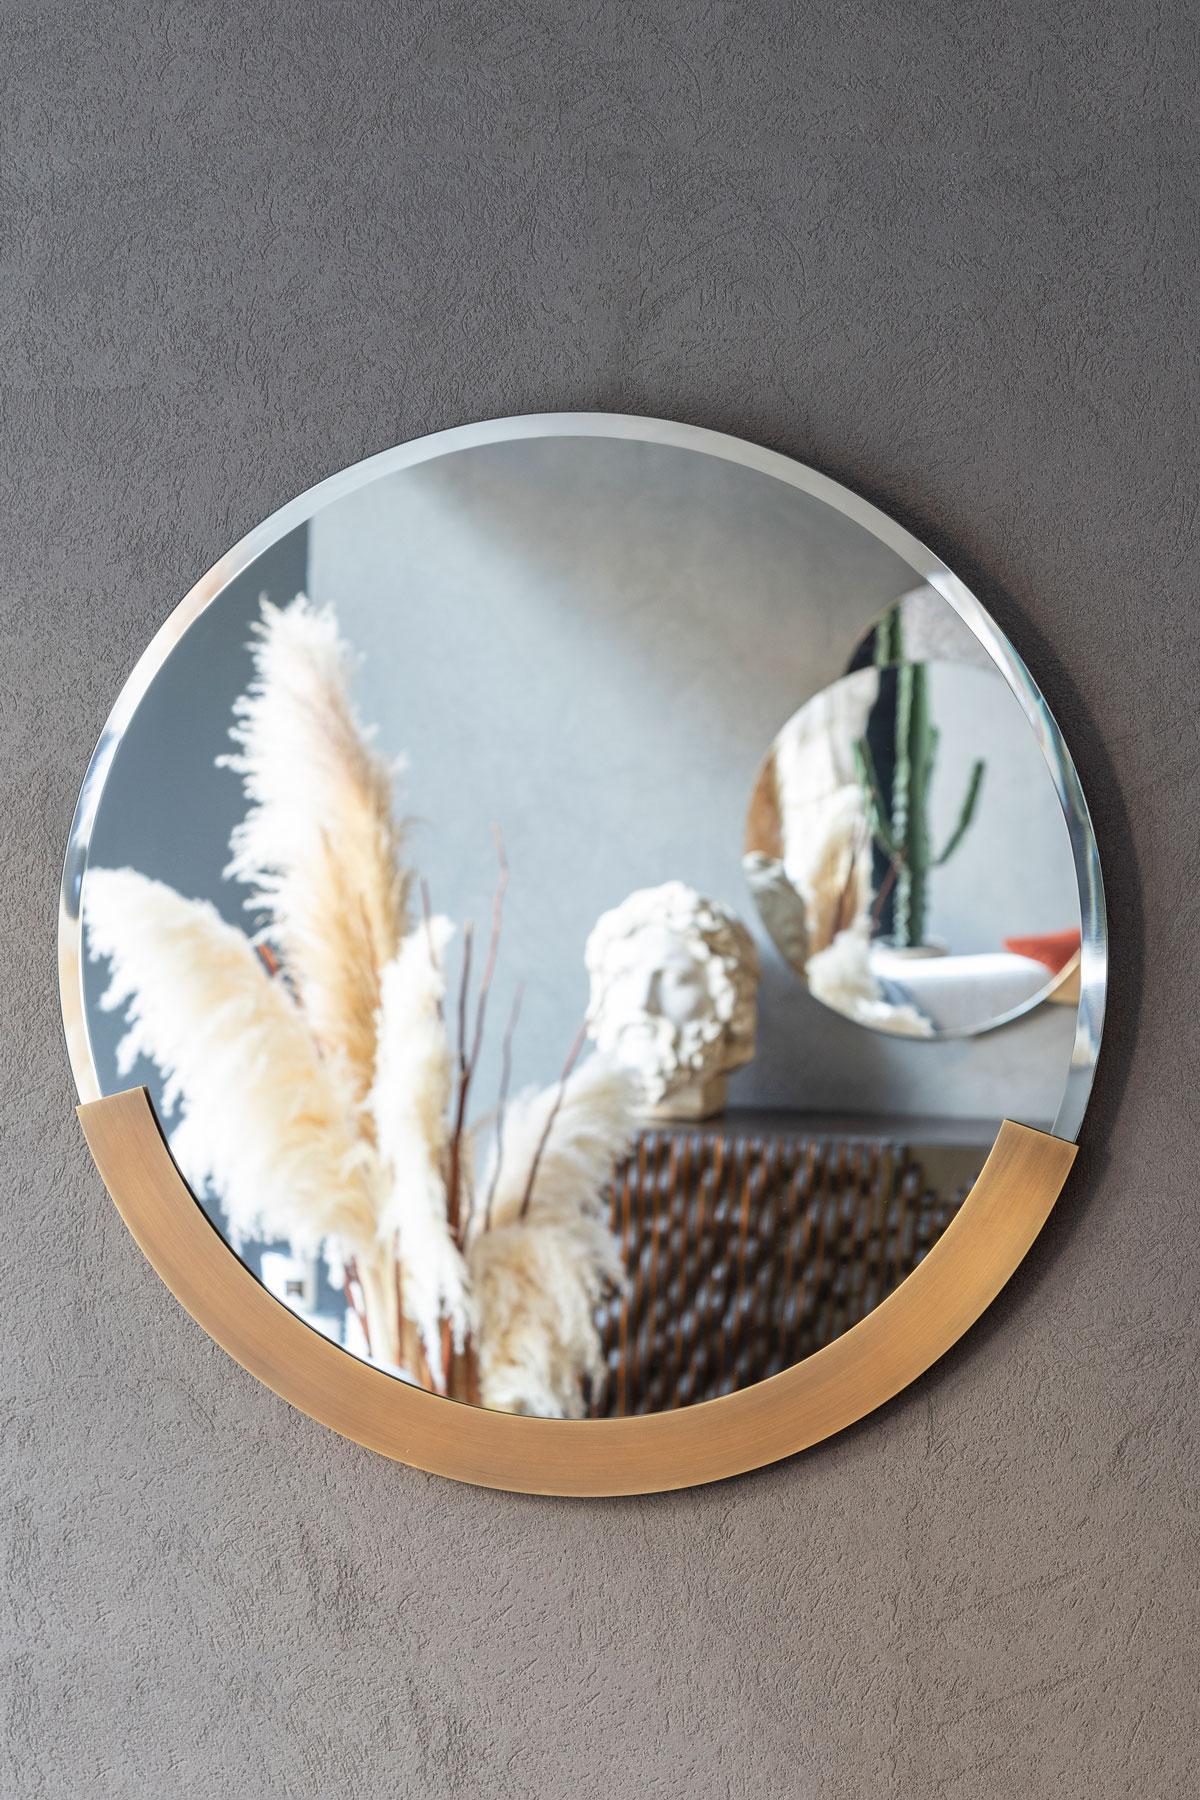 Daisy mirror by Lagu.
Designed by Ufuk Ceylan.
Dimensions: D 70 x H 70 cm.
Materials: brass, mirror.

Daisy mirror that reflects you in its simplest form...

LAGU
Istanbul, Turkey
A design approach that likes to live with good details...